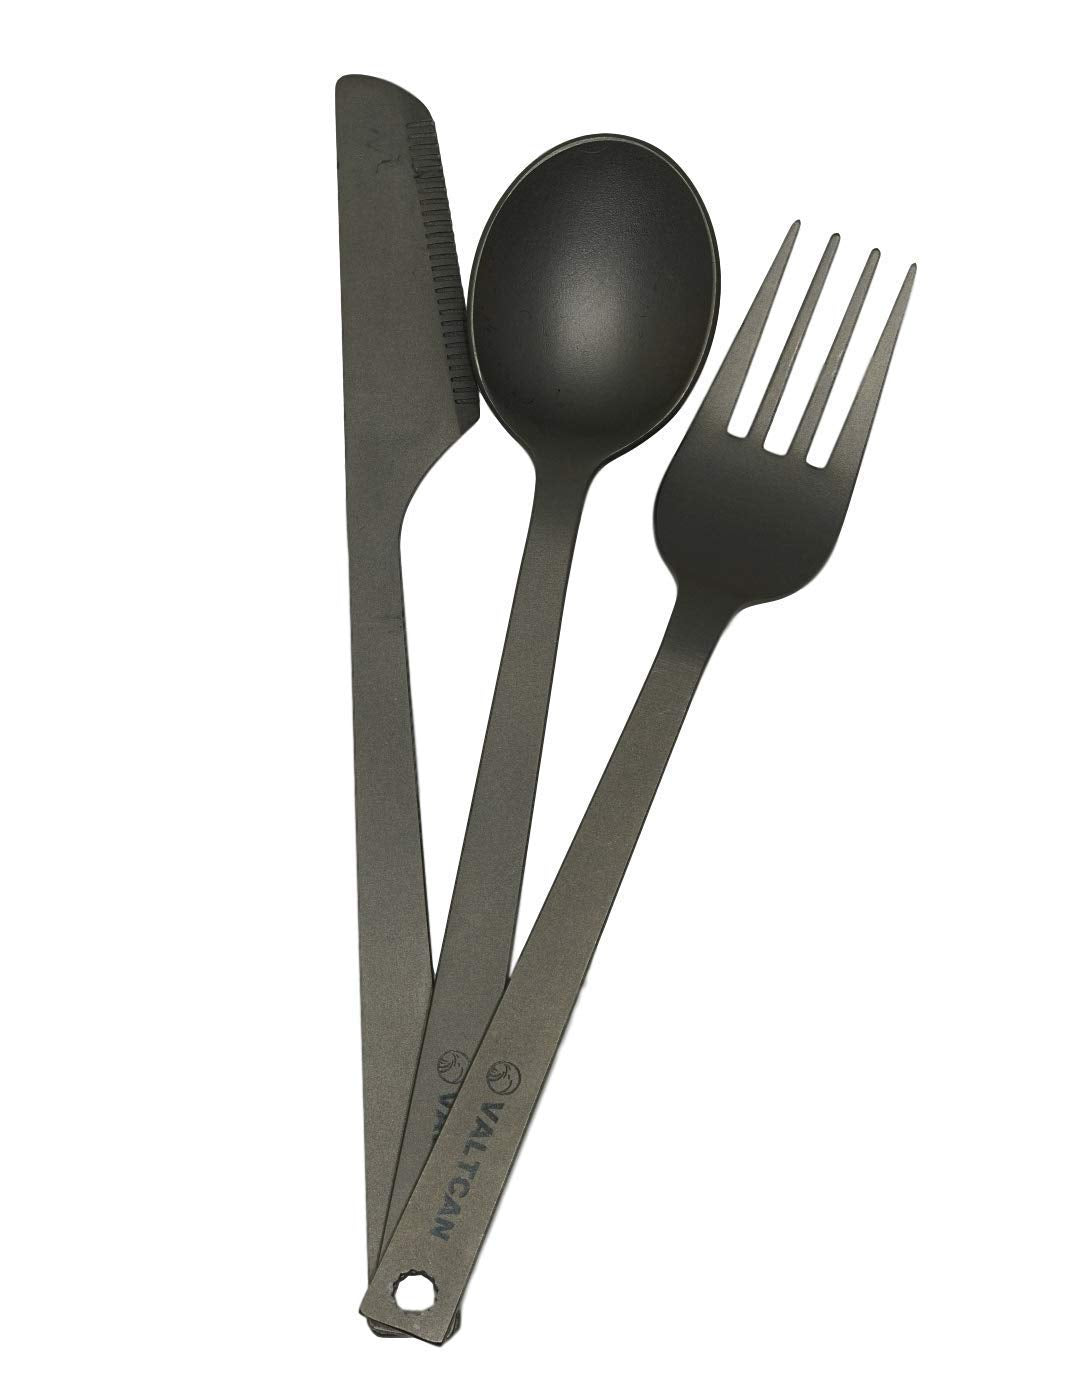 Aluminum Cutlery Made from Bombshells (Spoon, Fork, Knife) Set of 3 -  TaiBaan